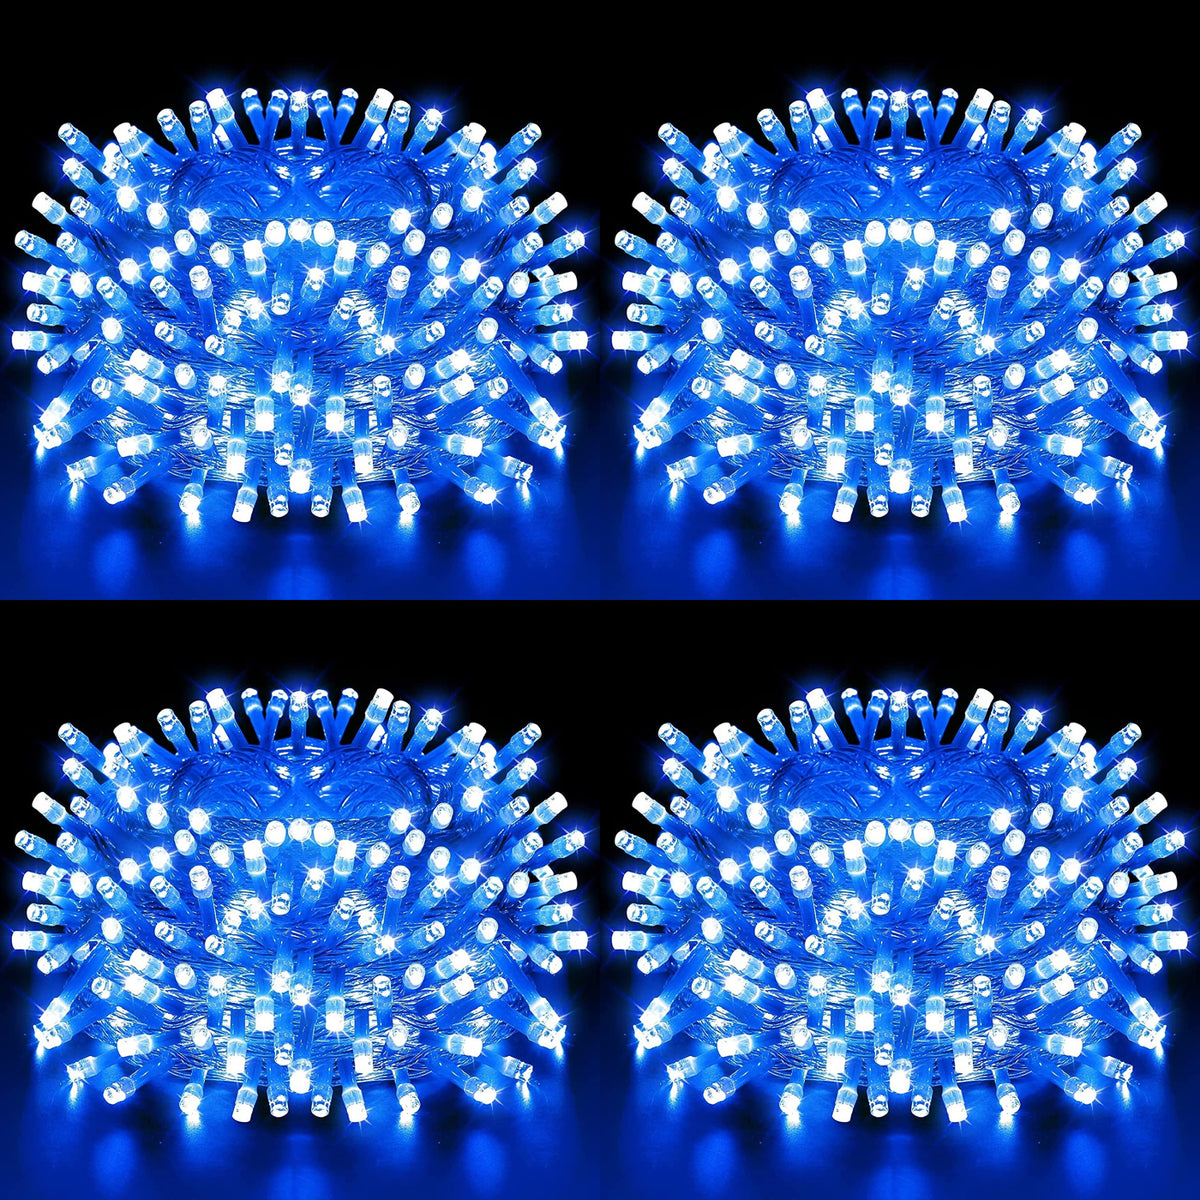 DecorTwist LED String Light for Home and Office Decor | Indoor & Outdoor Decorative Lights | Christmas | Diwali | Wedding | 15 Meter Length (Pack of 4) (Blue)